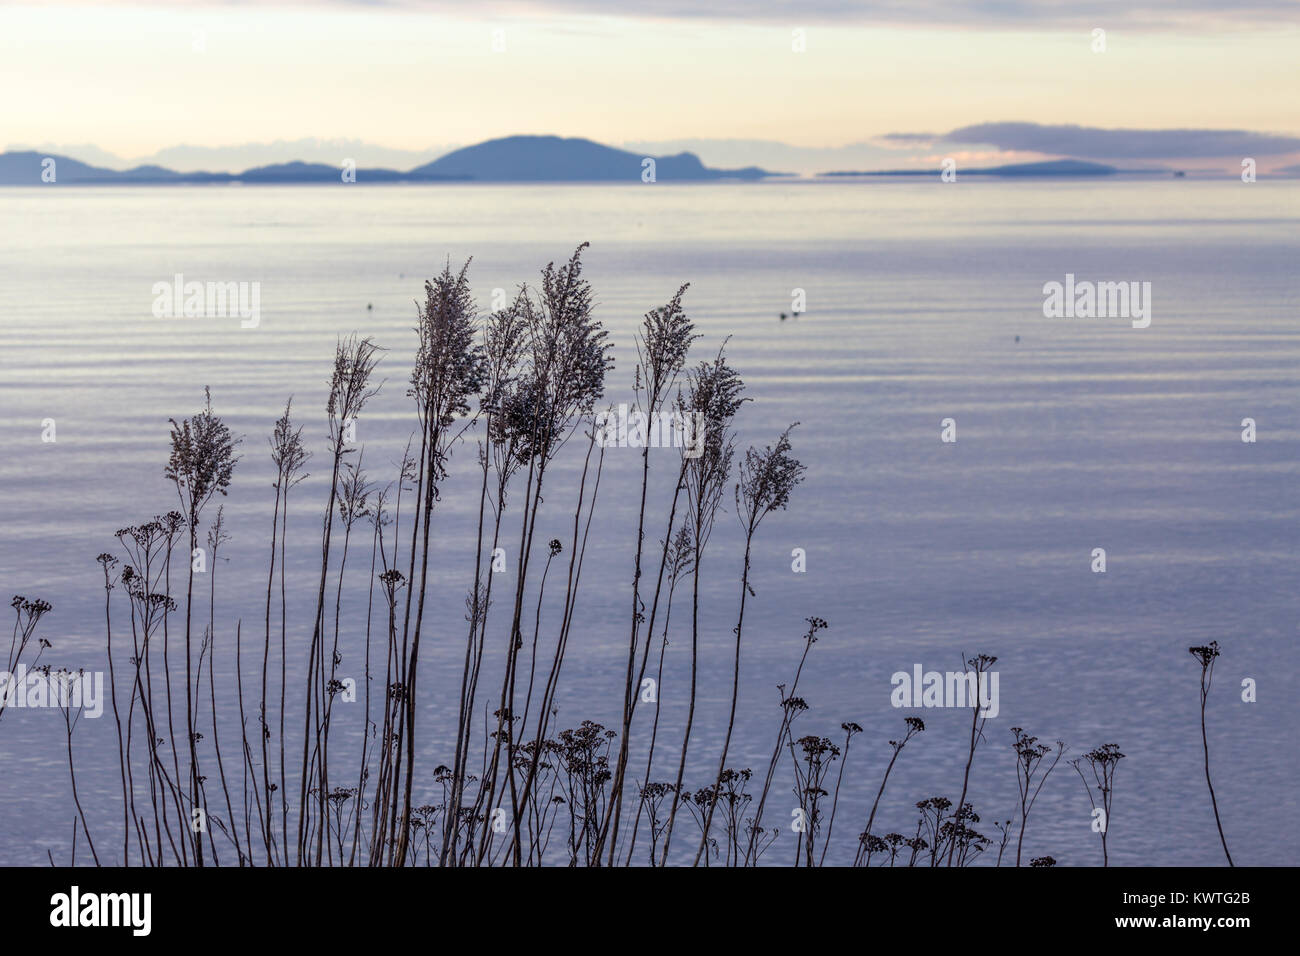 Close-up of delicate weed stems before a calming view over the Georgia Strait to the blurry shapes of the San Juan Islands and Olympic Peninsula, WA. Stock Photo